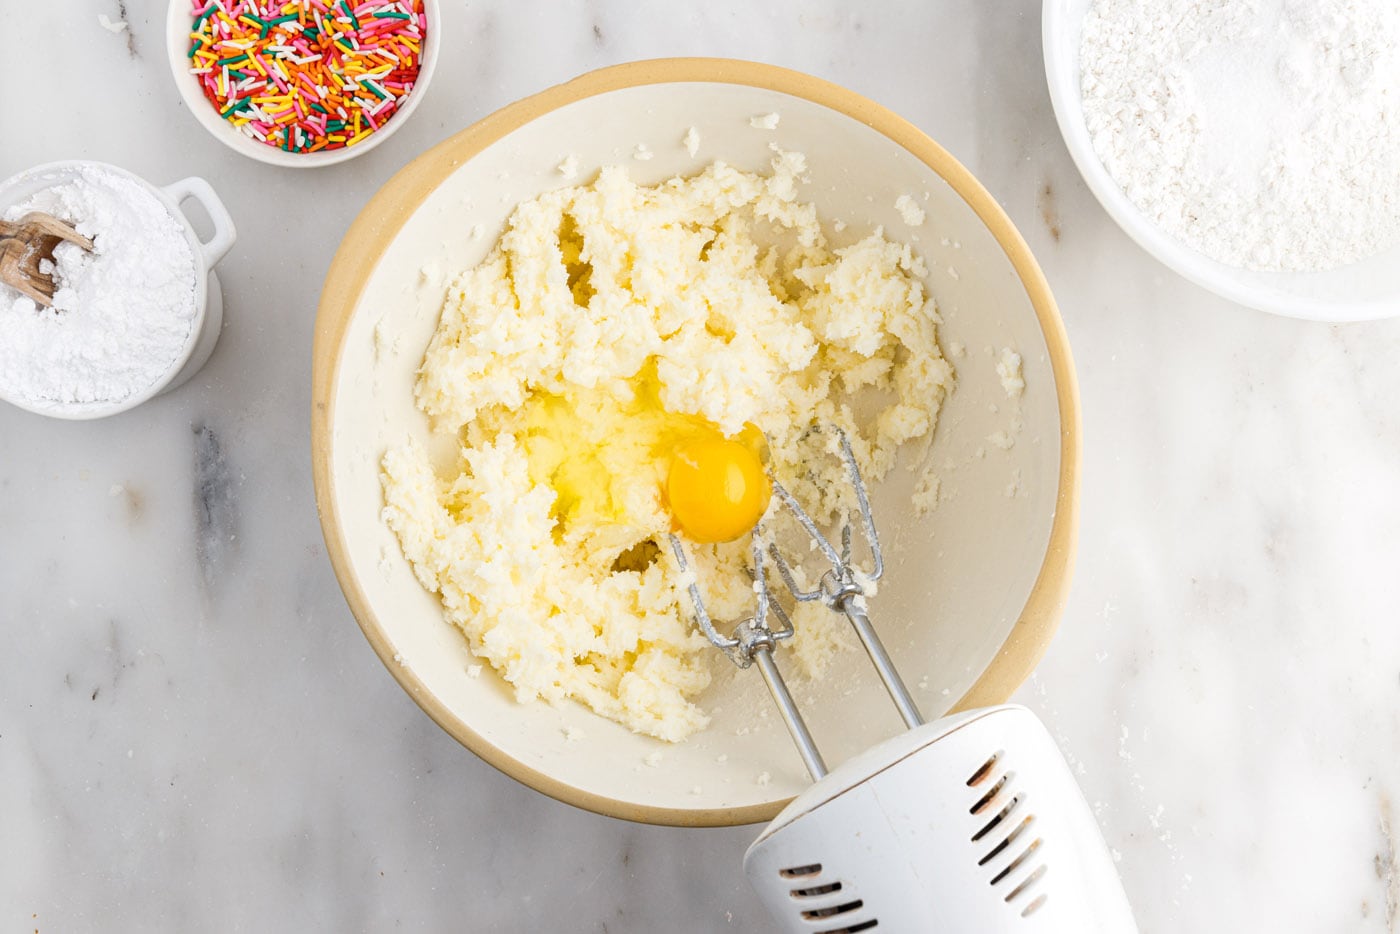 beating egg into butter and sugar mixture